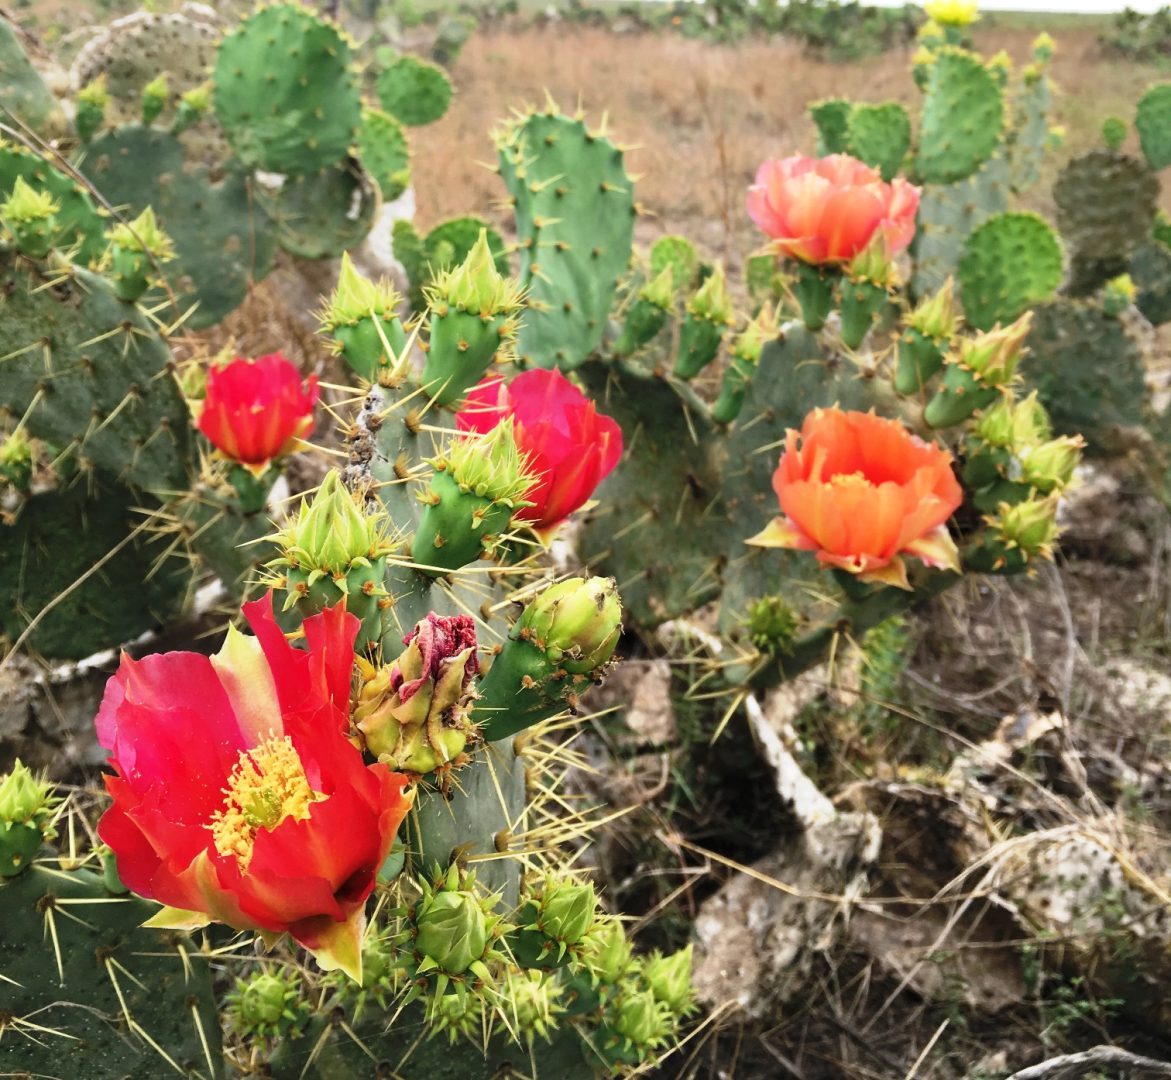 Colorful blooms on prickly pear cactus at Palo Alto Battlefield National Monument